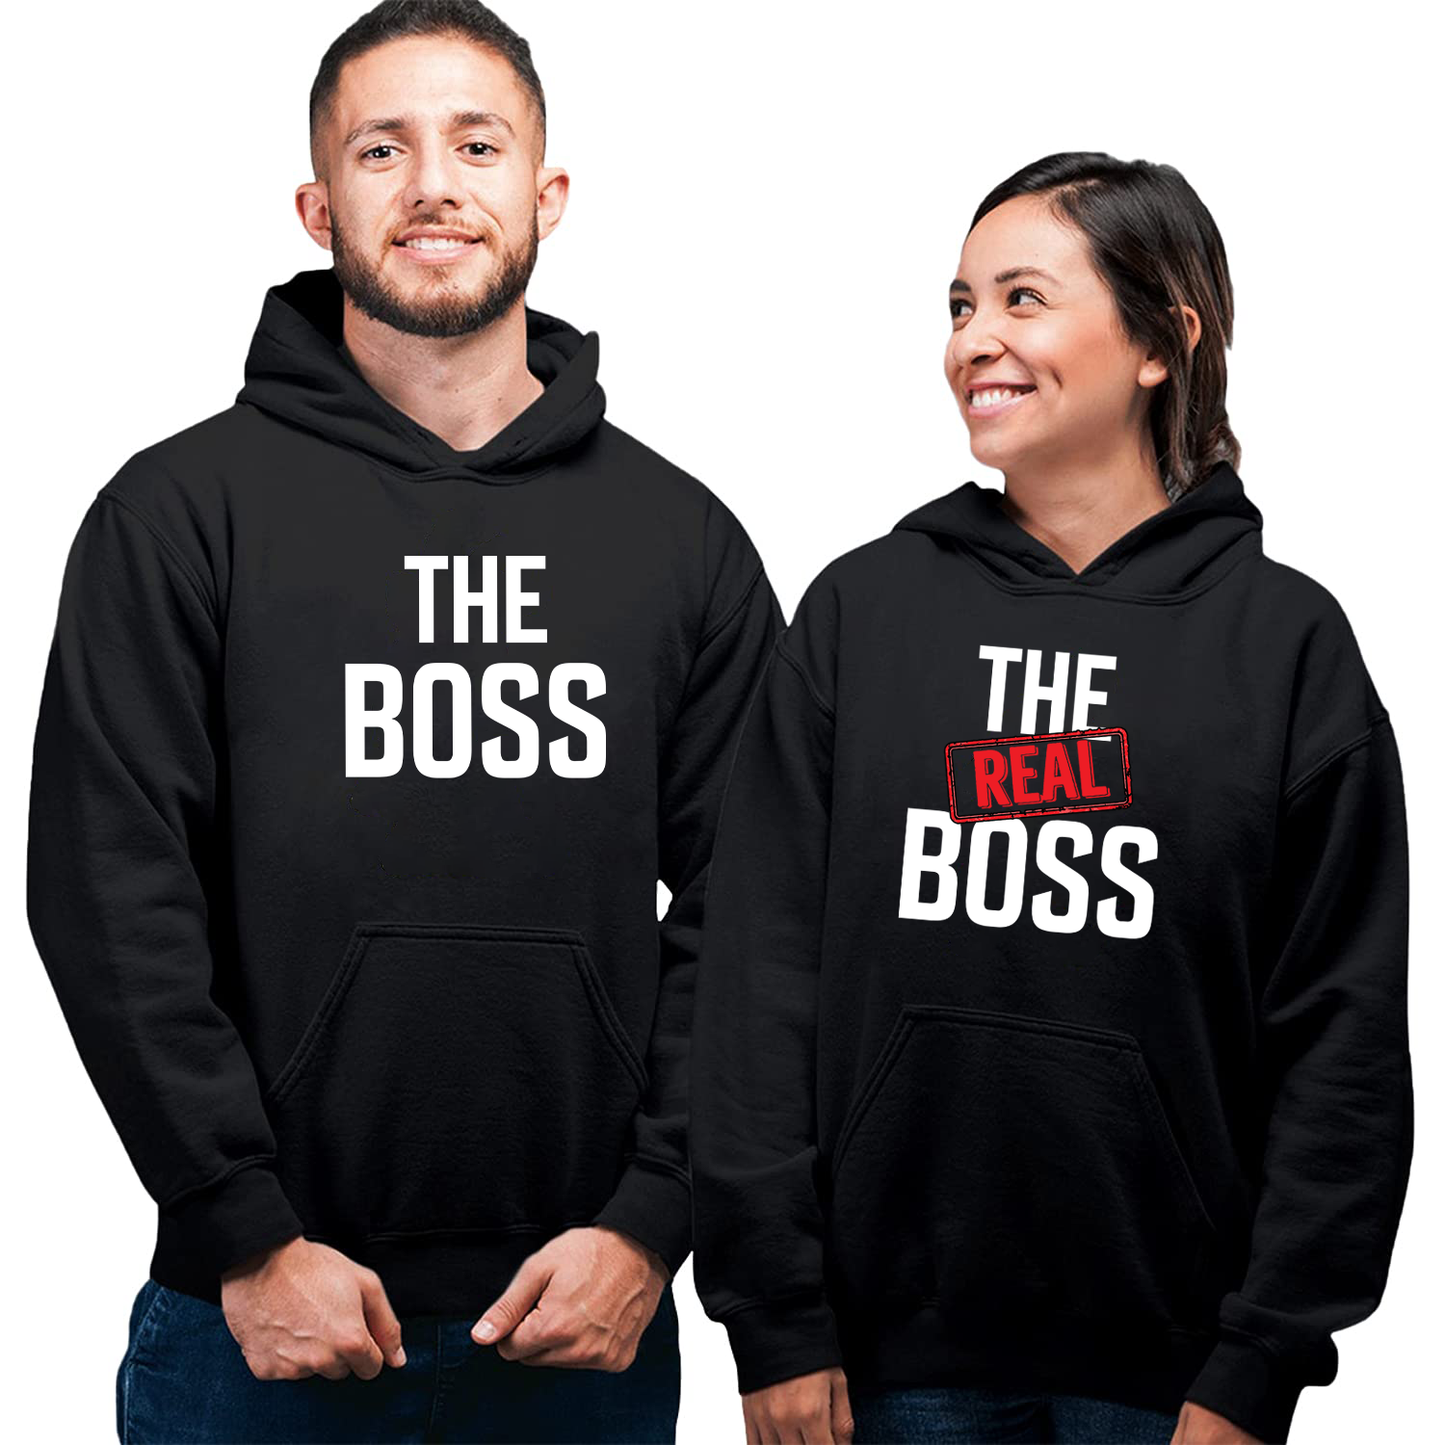 The Boss & The Real Boss Matching Couple Hoodies For Valentine's Day